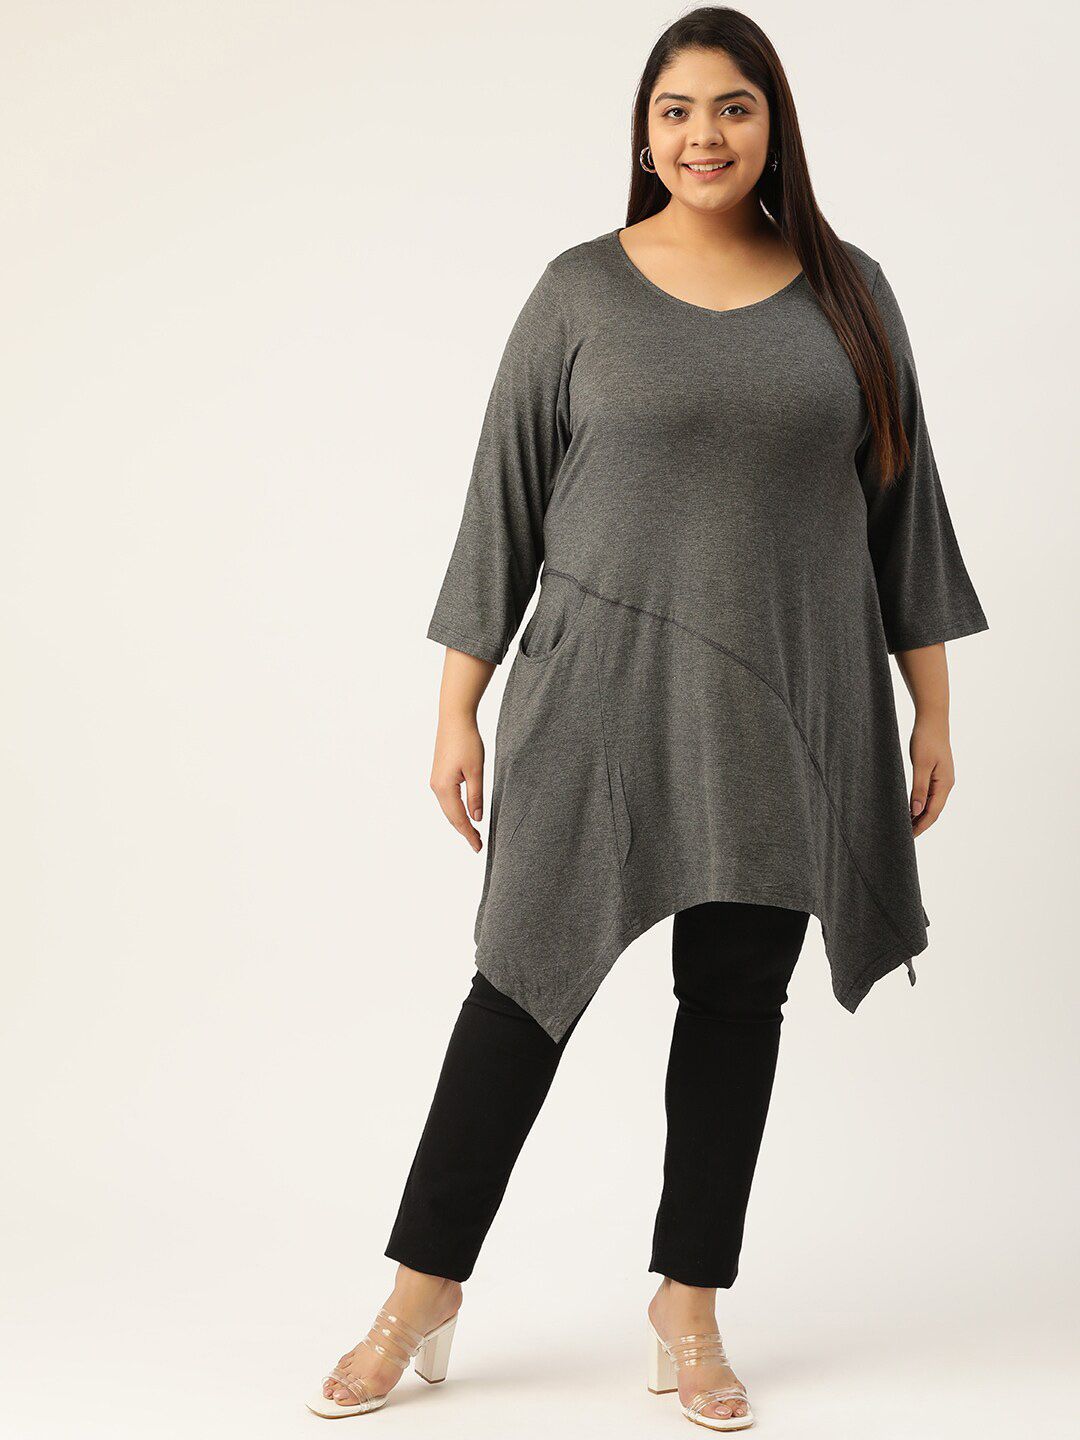 theRebelinme Plus Size Women's Charcoal Grey Solid Color Asymmetrical Longline Knitted Top Price in India